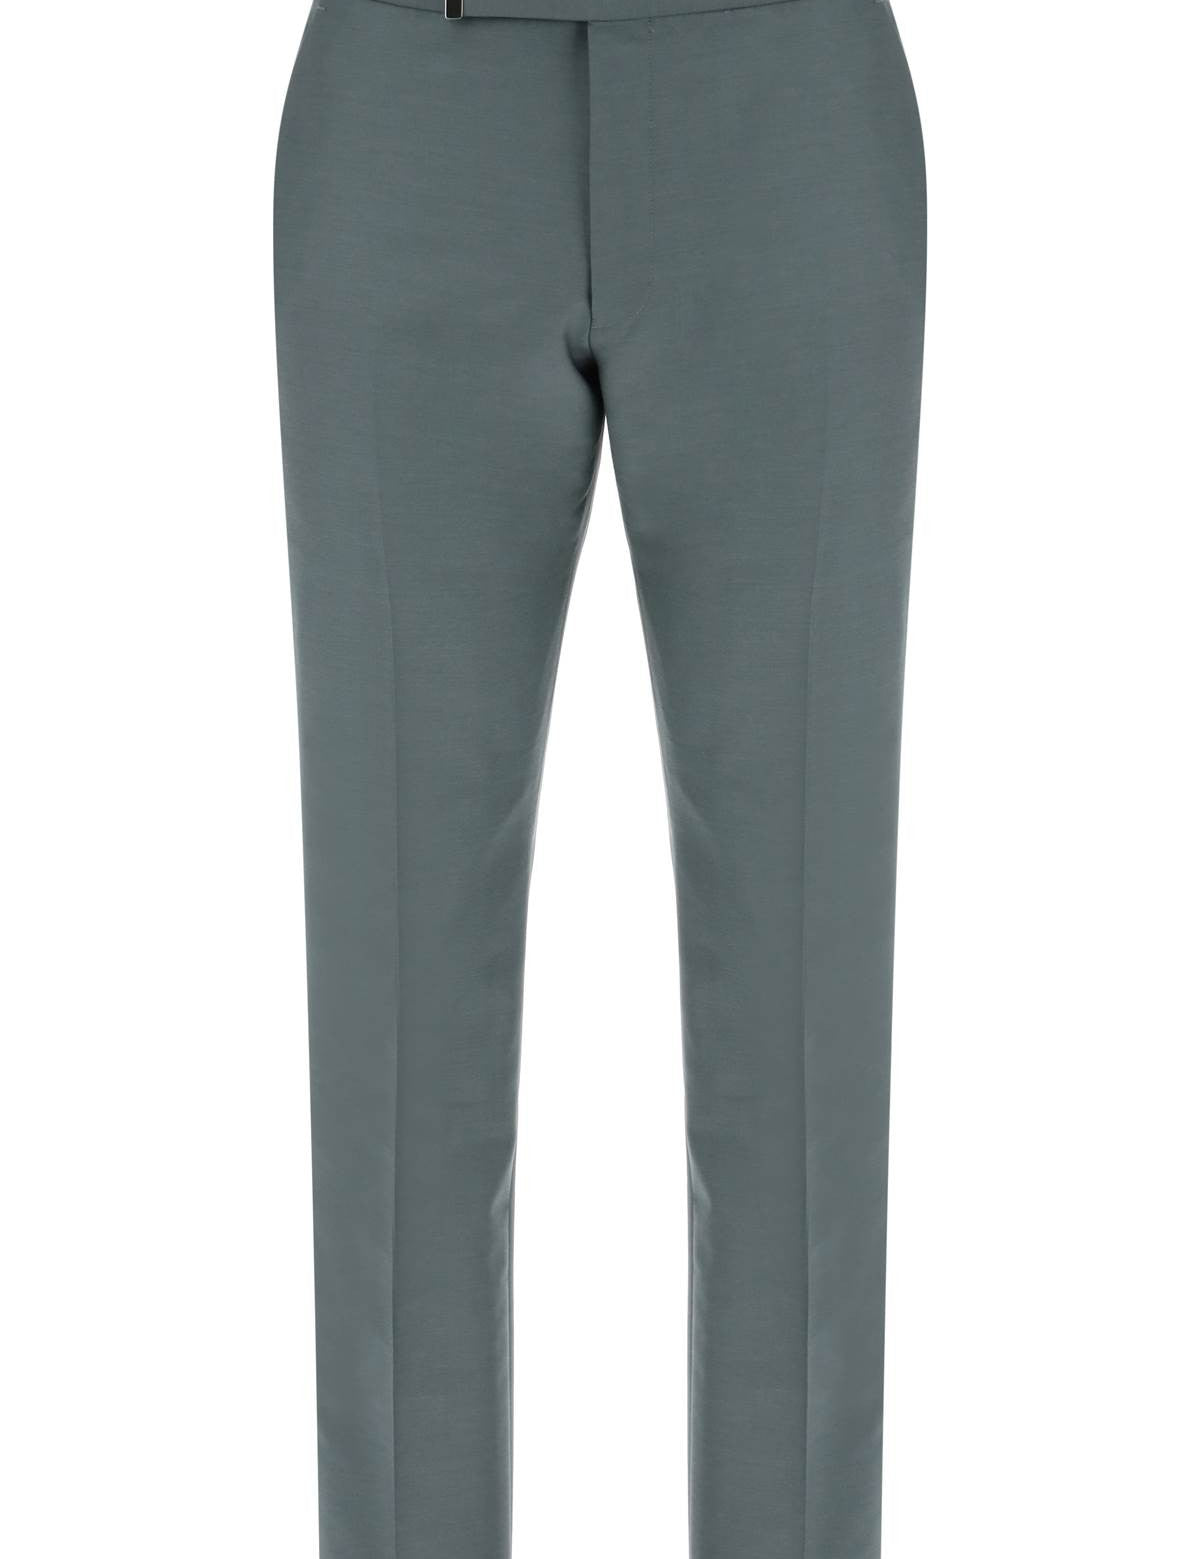 tom-ford-atticus-tailored-trousers-in-mikado.jpg